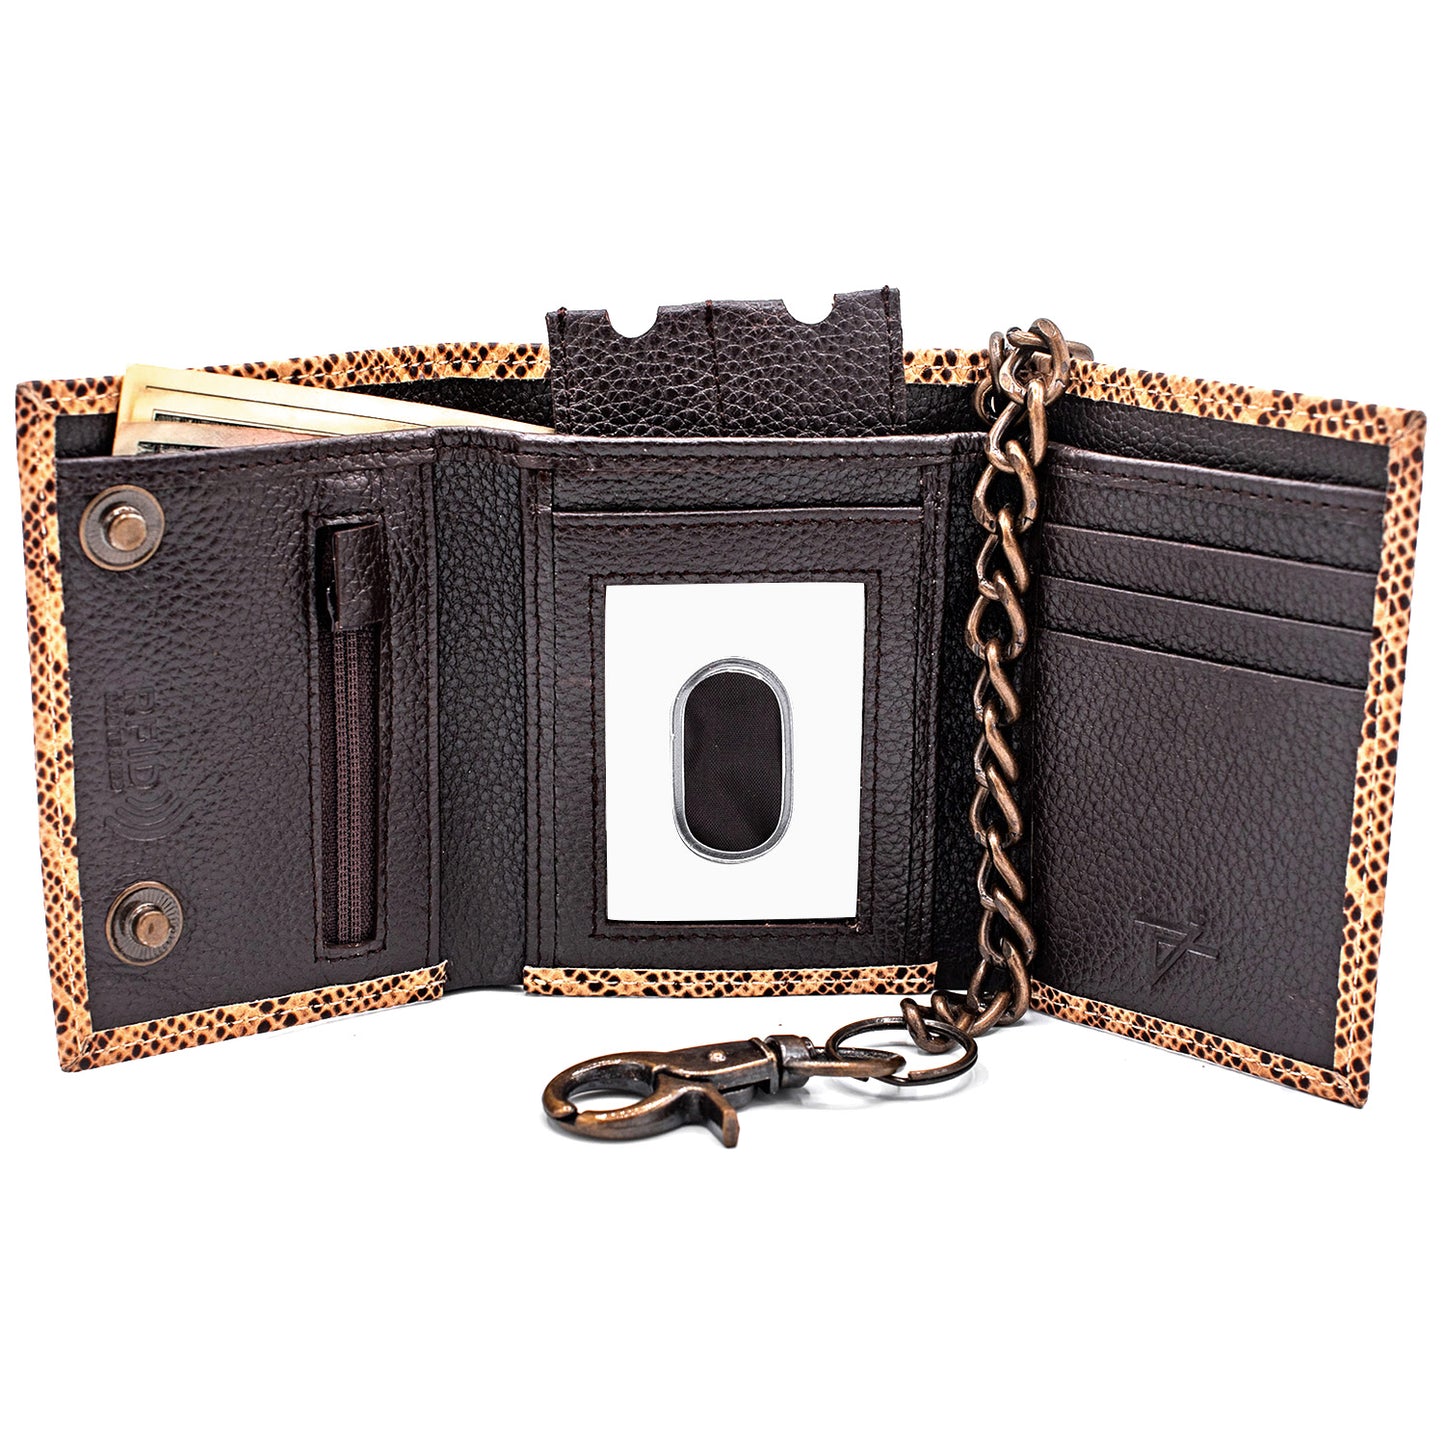 Cobra Chain Leather Wallet Trifold